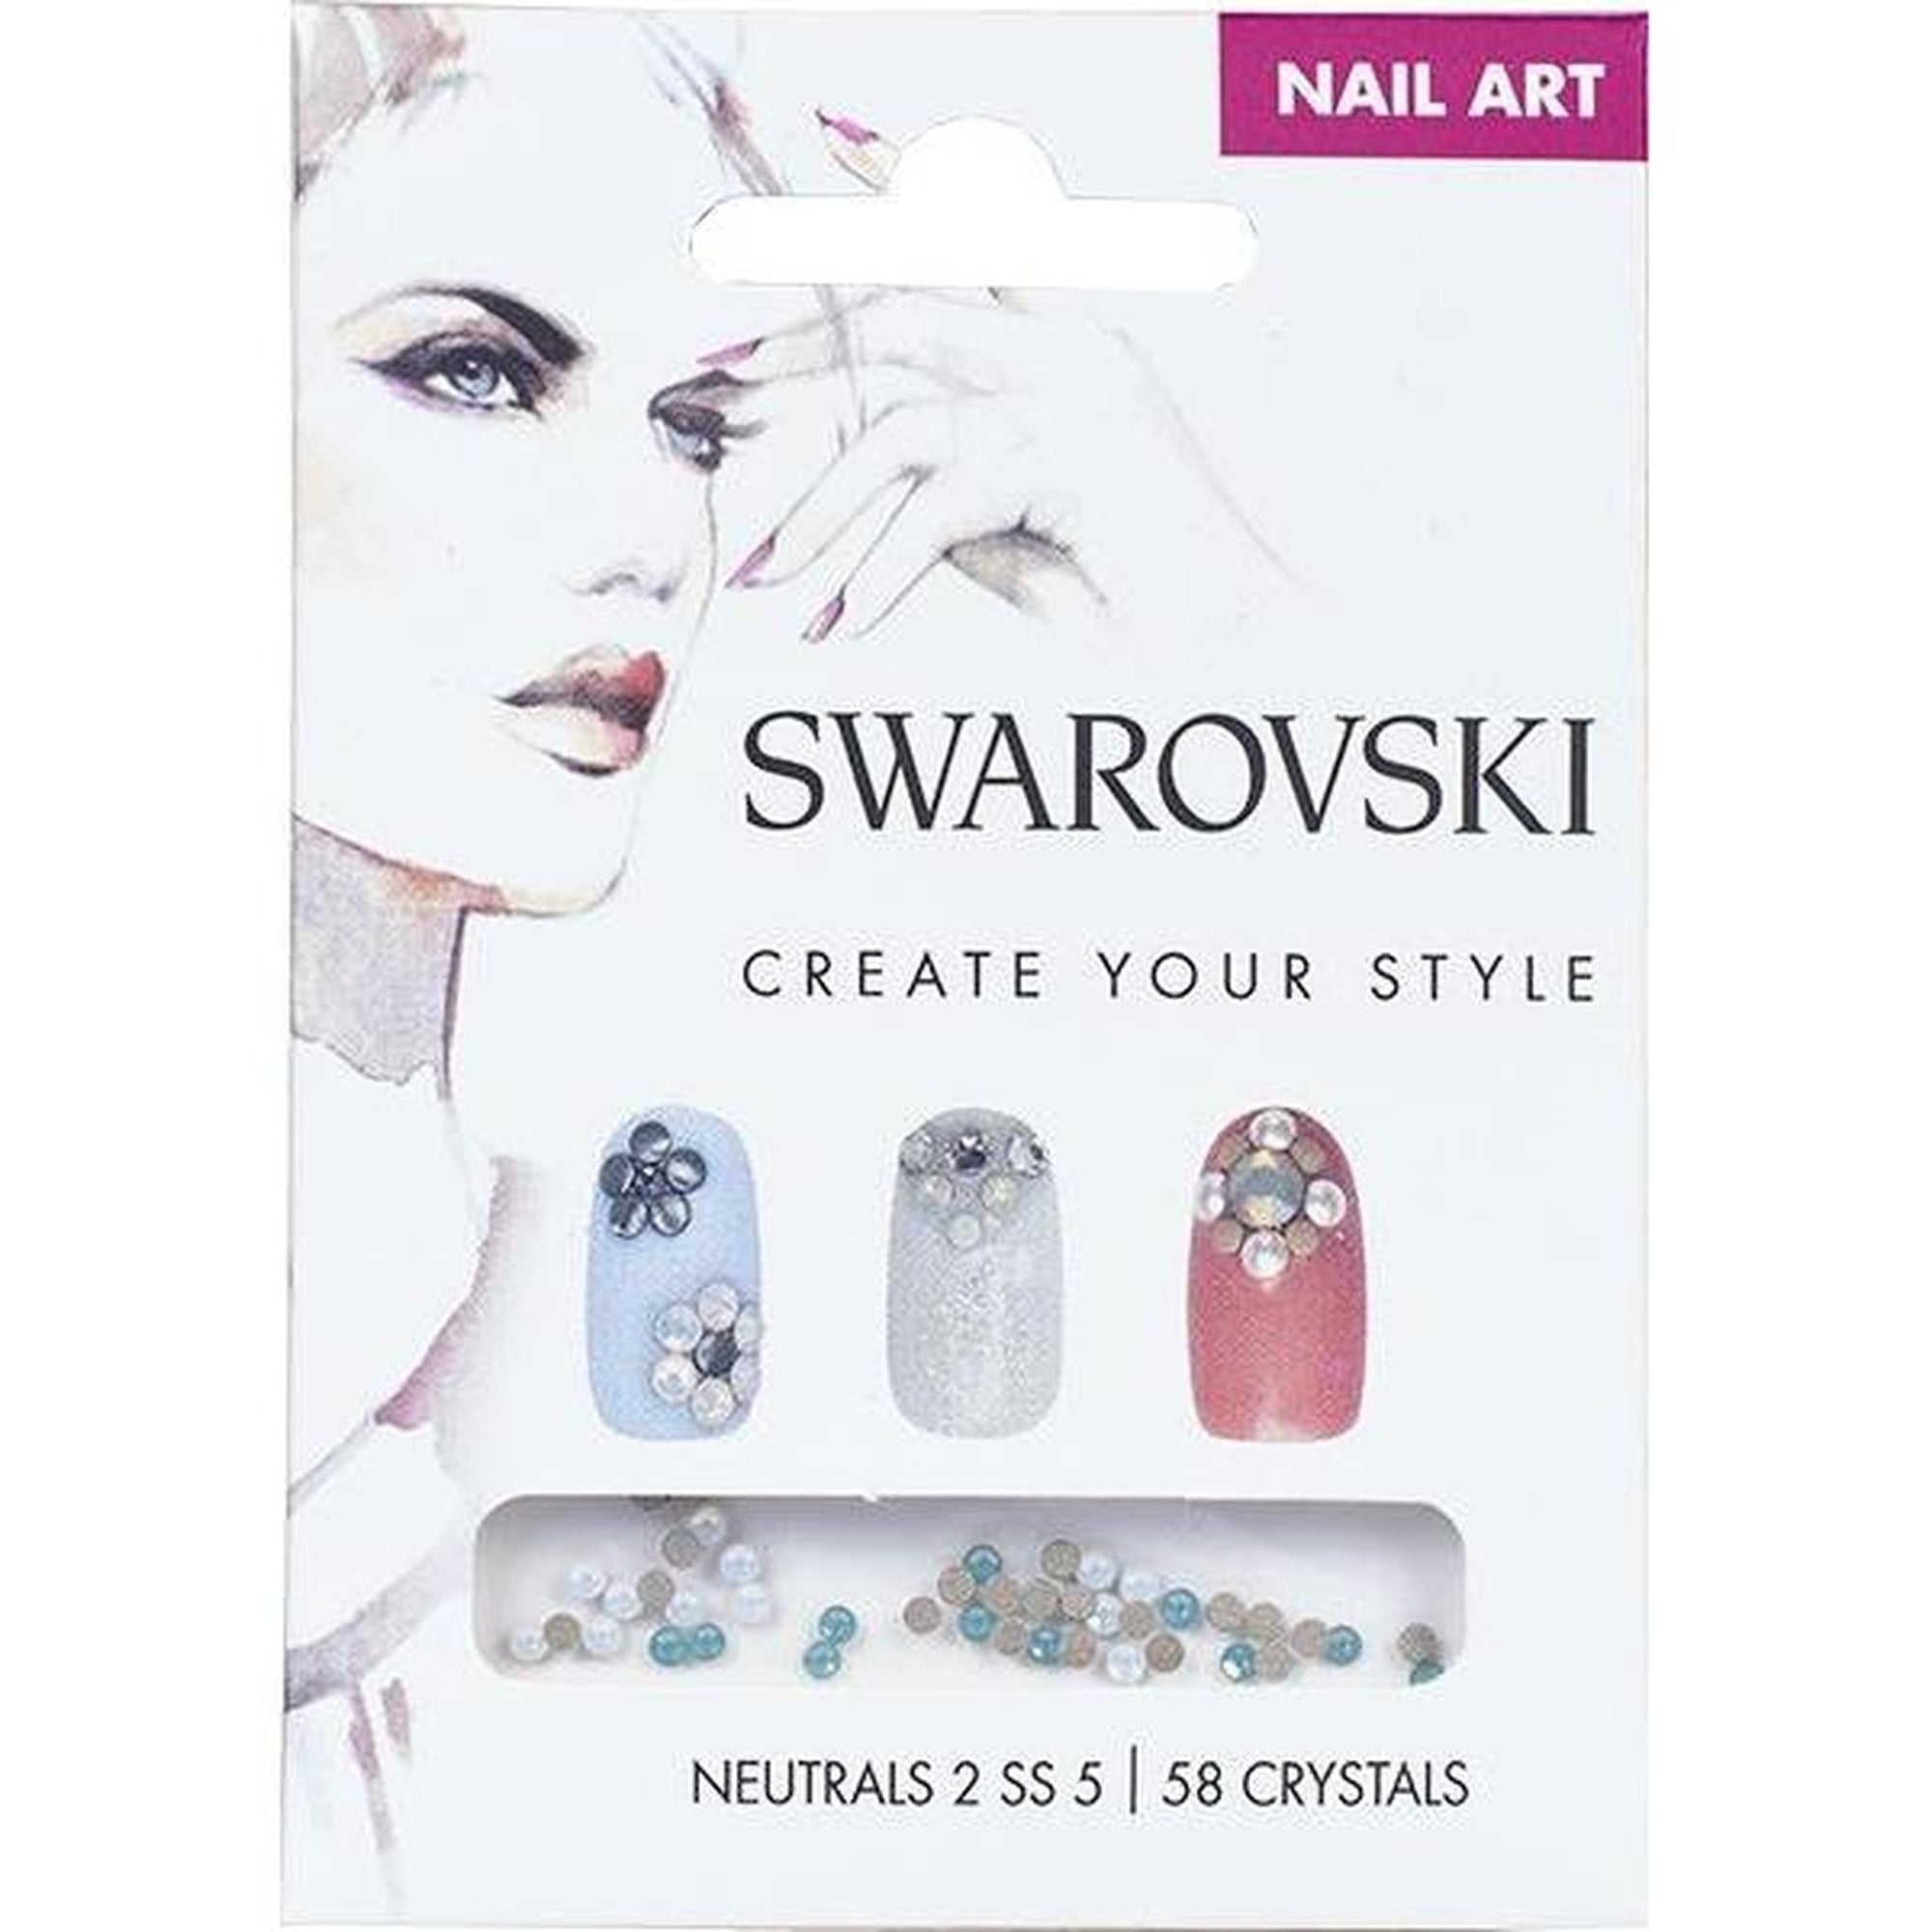 Buy BLINGINBOX 14400PCS Clear SS6-SS20 4 Sizes Wholesale Nail Art Rhinestone  Flatback Round Glass Gems or Nail Art Decorations (Crystal AB, SS20-4.8mm)  Online at Low Prices in India - Amazon.in